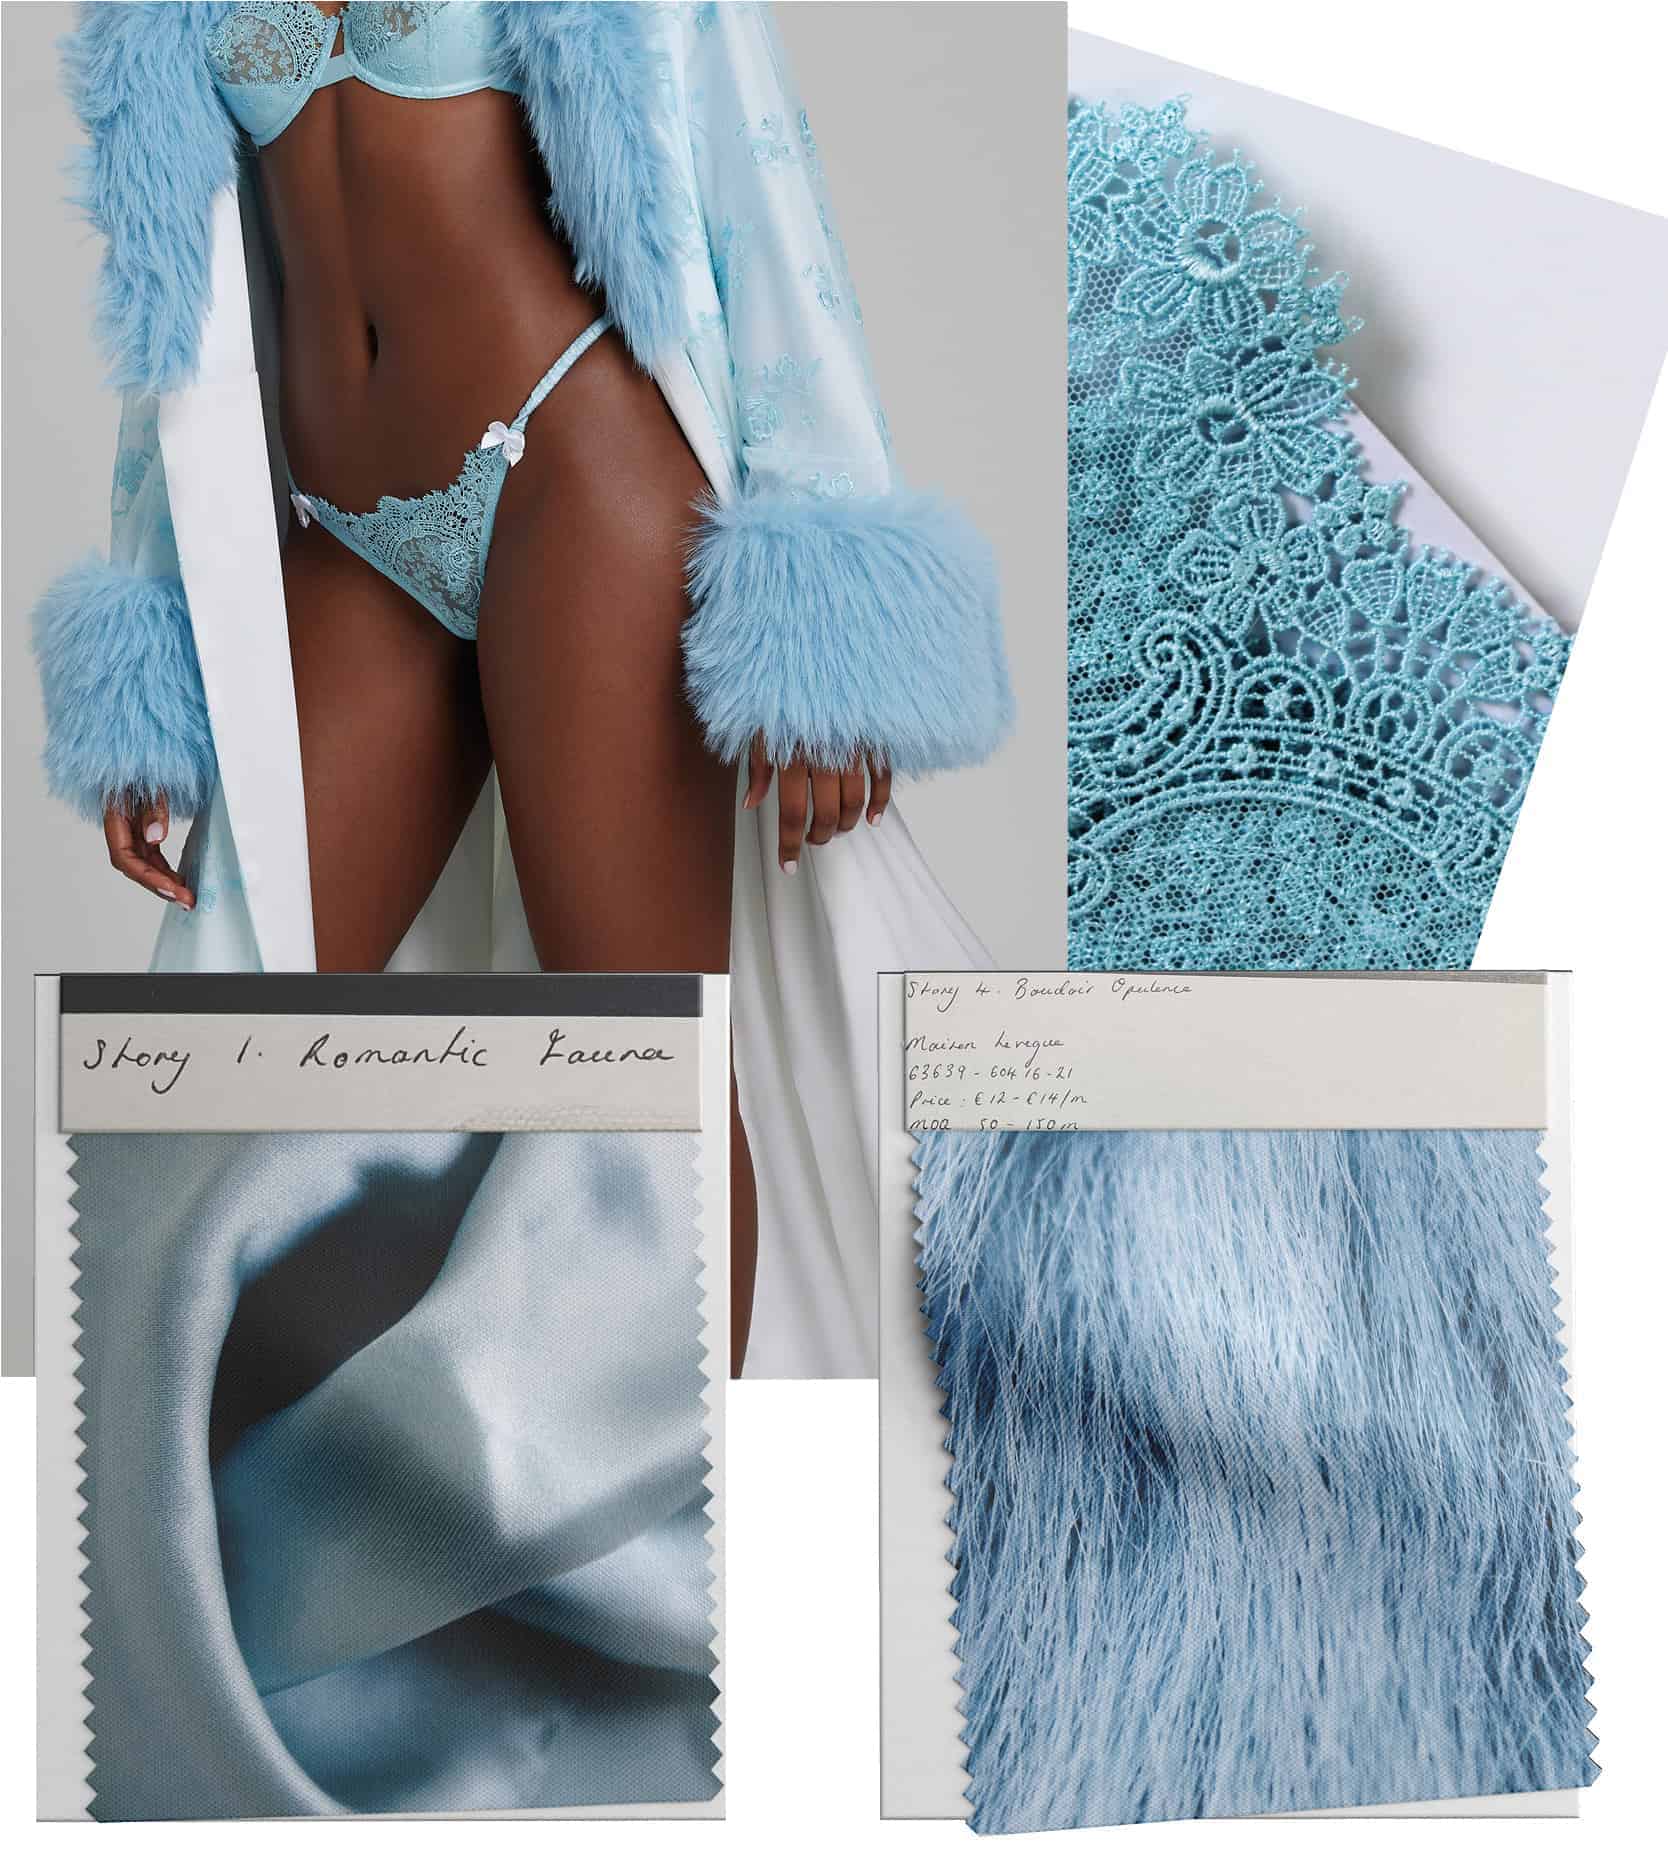 Silk, lace and faux fur sourcing for lingerie